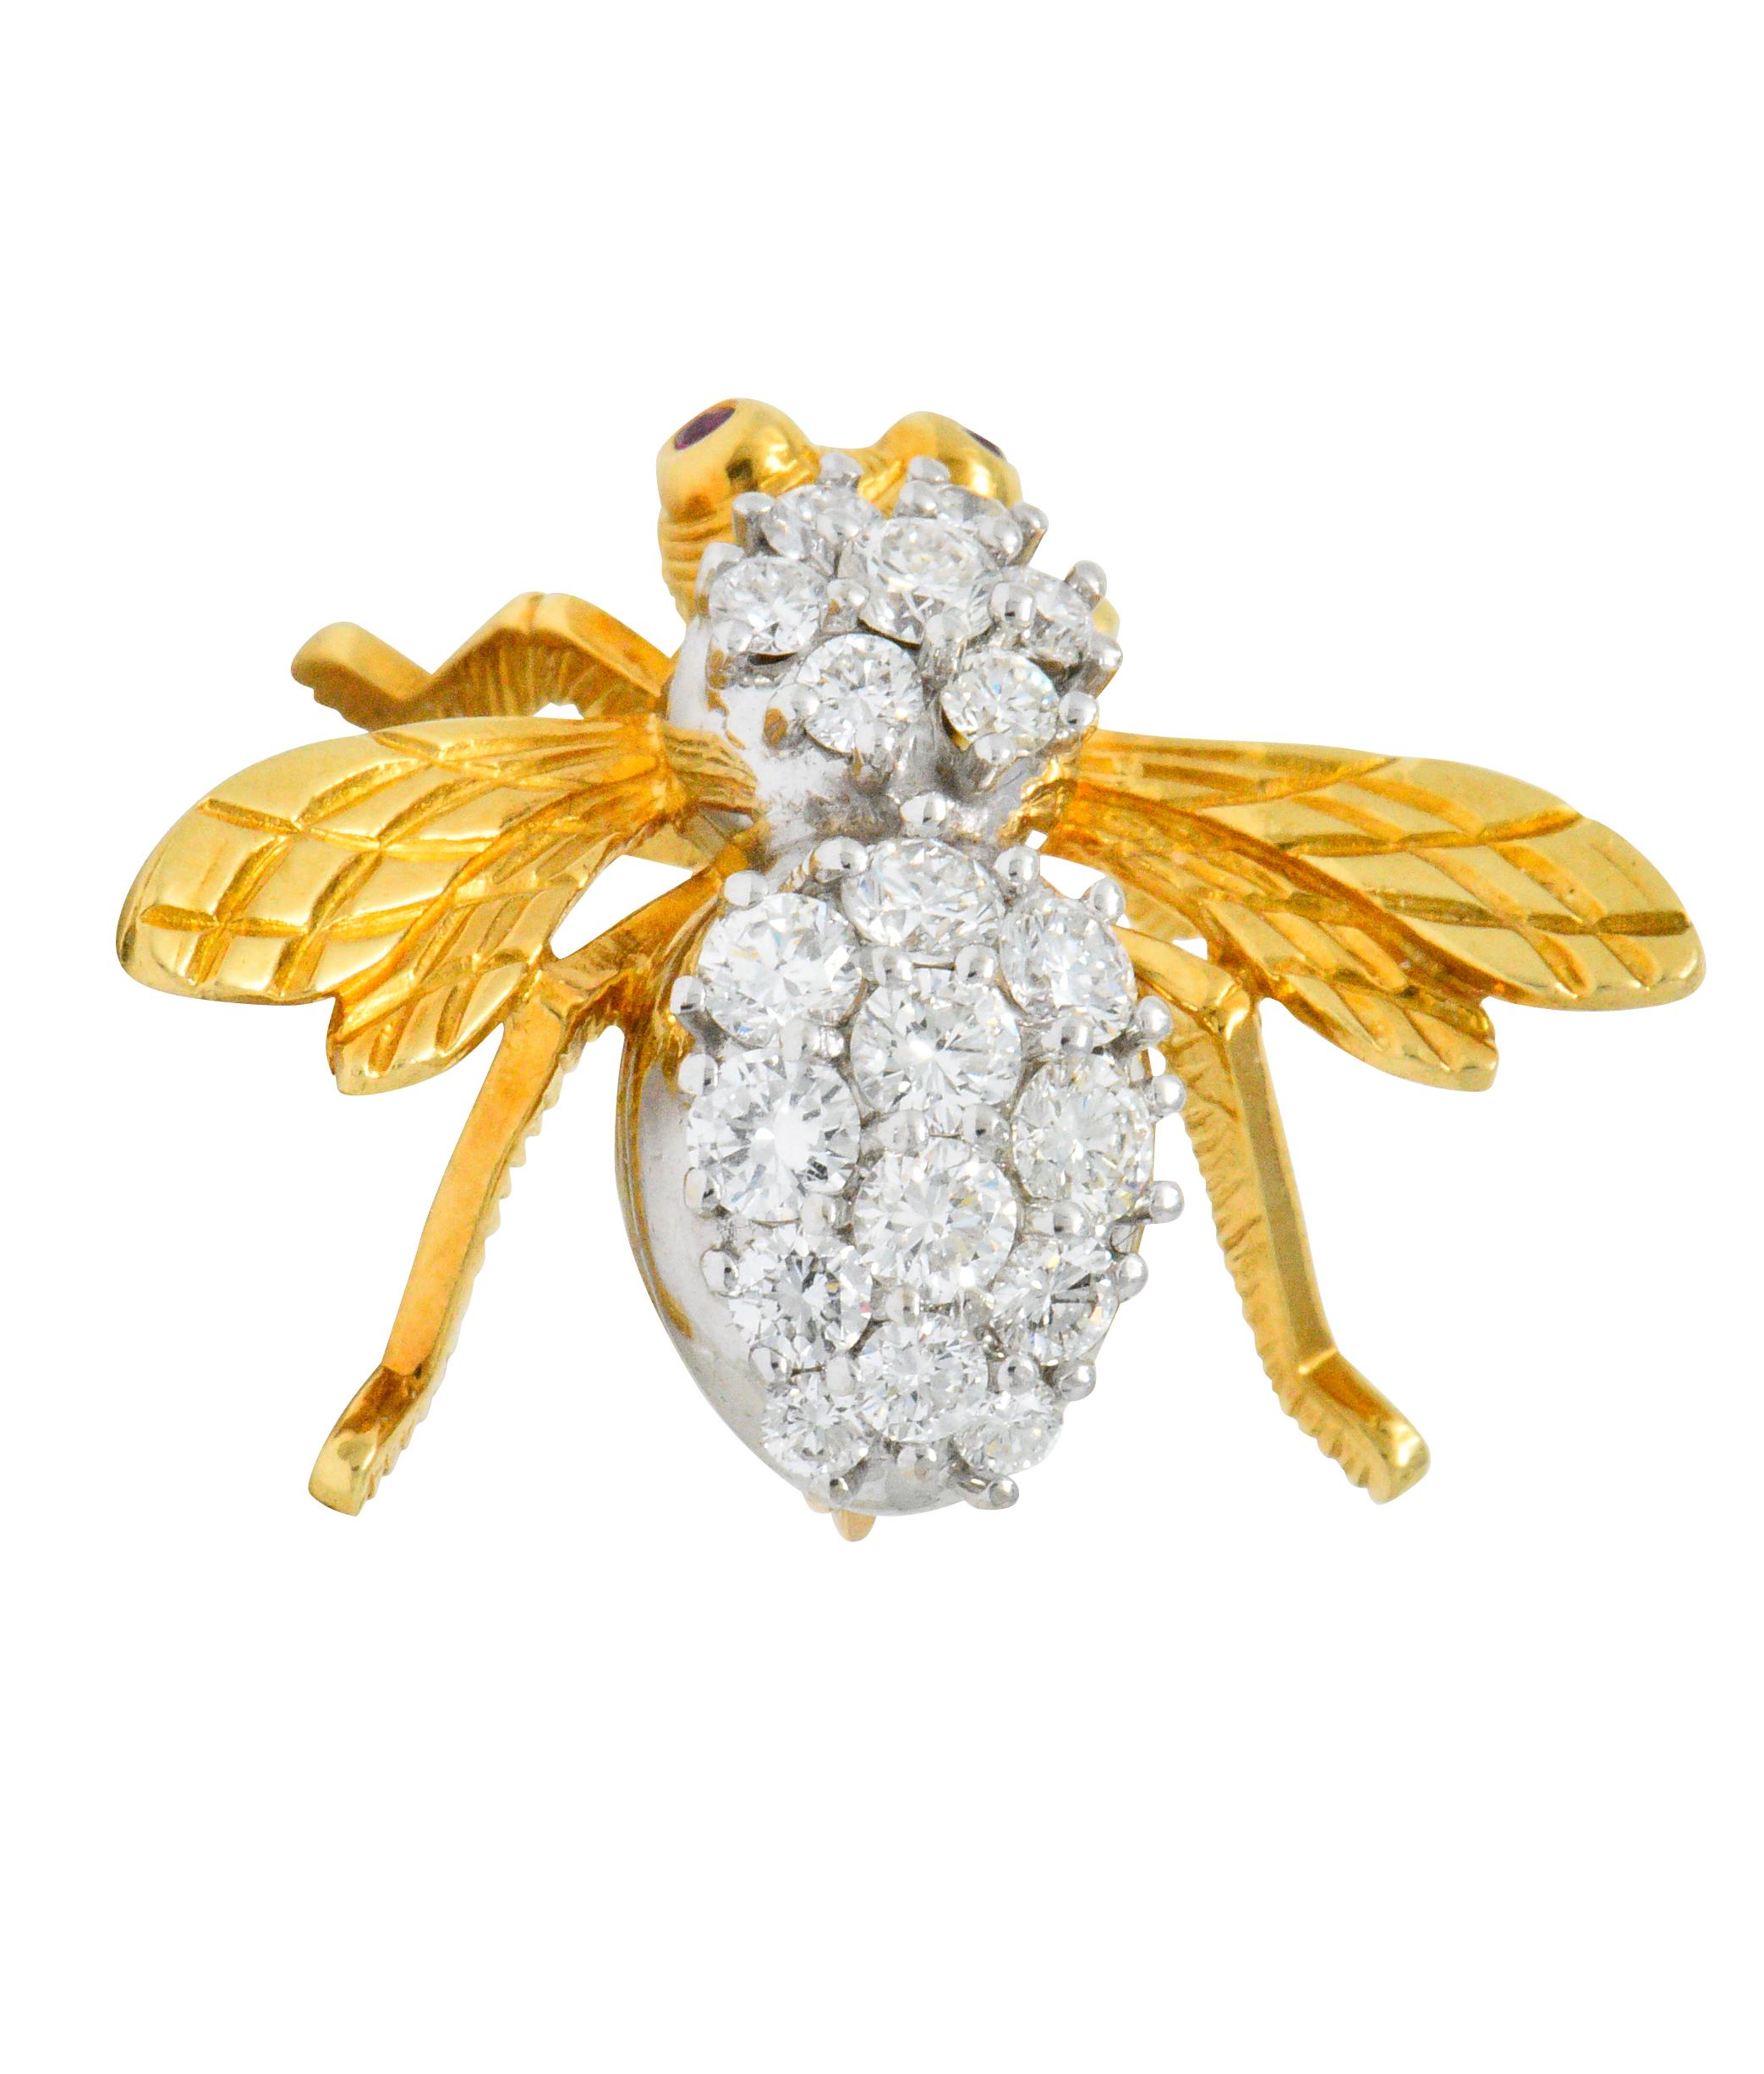 Designed as a bee with a round brilliant cut diamond set body weighing approximately 1.90 carats total, G/H color and VS clarity

With bezel set round cut ruby eyes weighing approximately 0.05 carats

Textured and engraved gold head, wings and